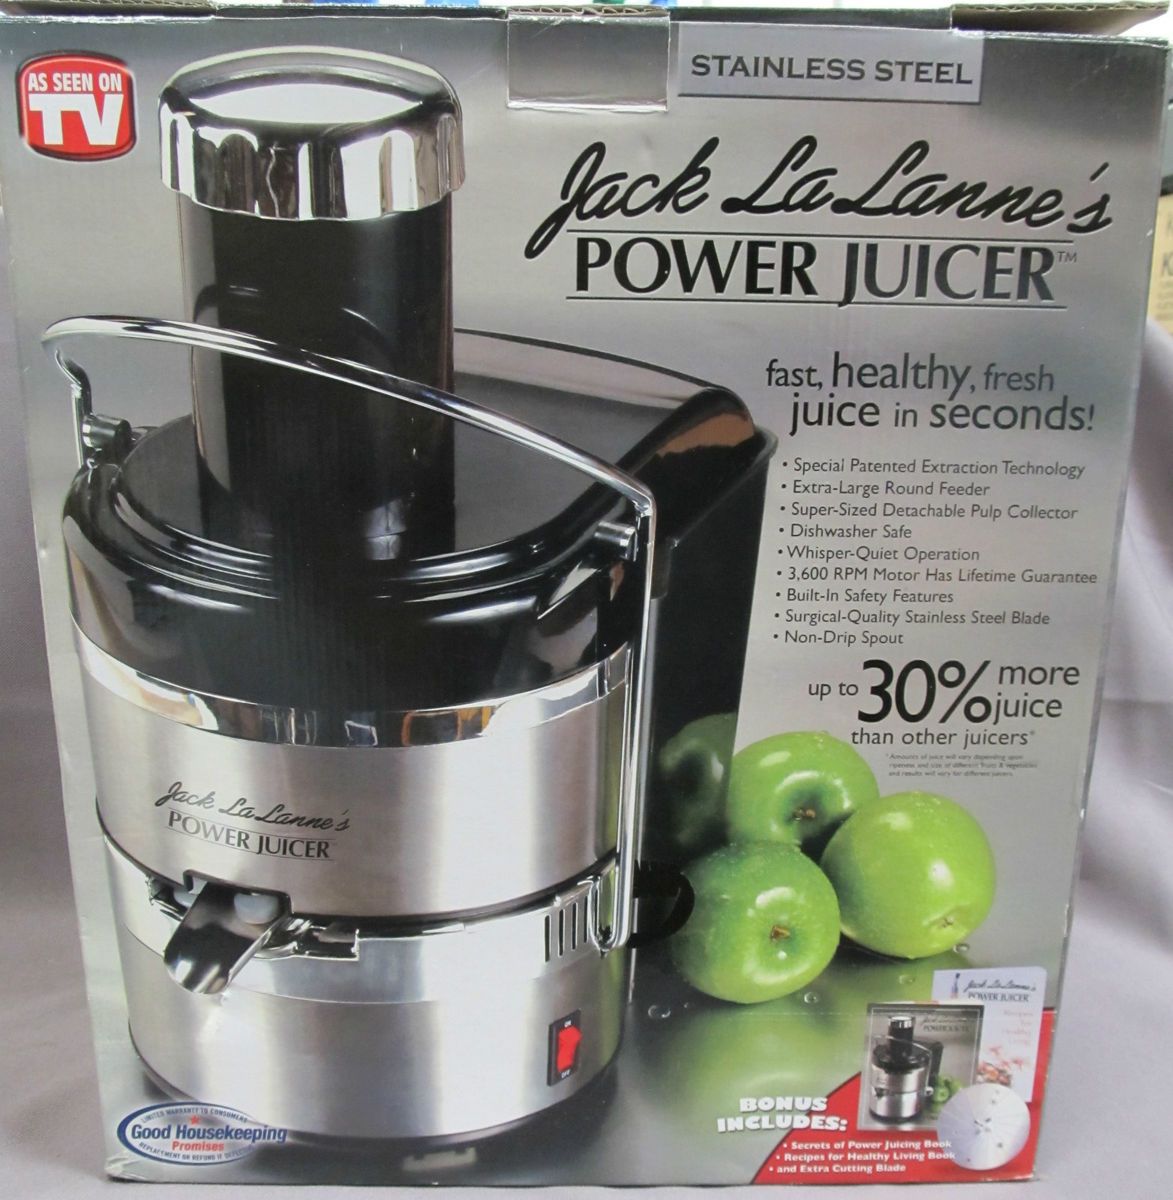 Jack Lalanne Power Juicer Stainless Steel New in Box